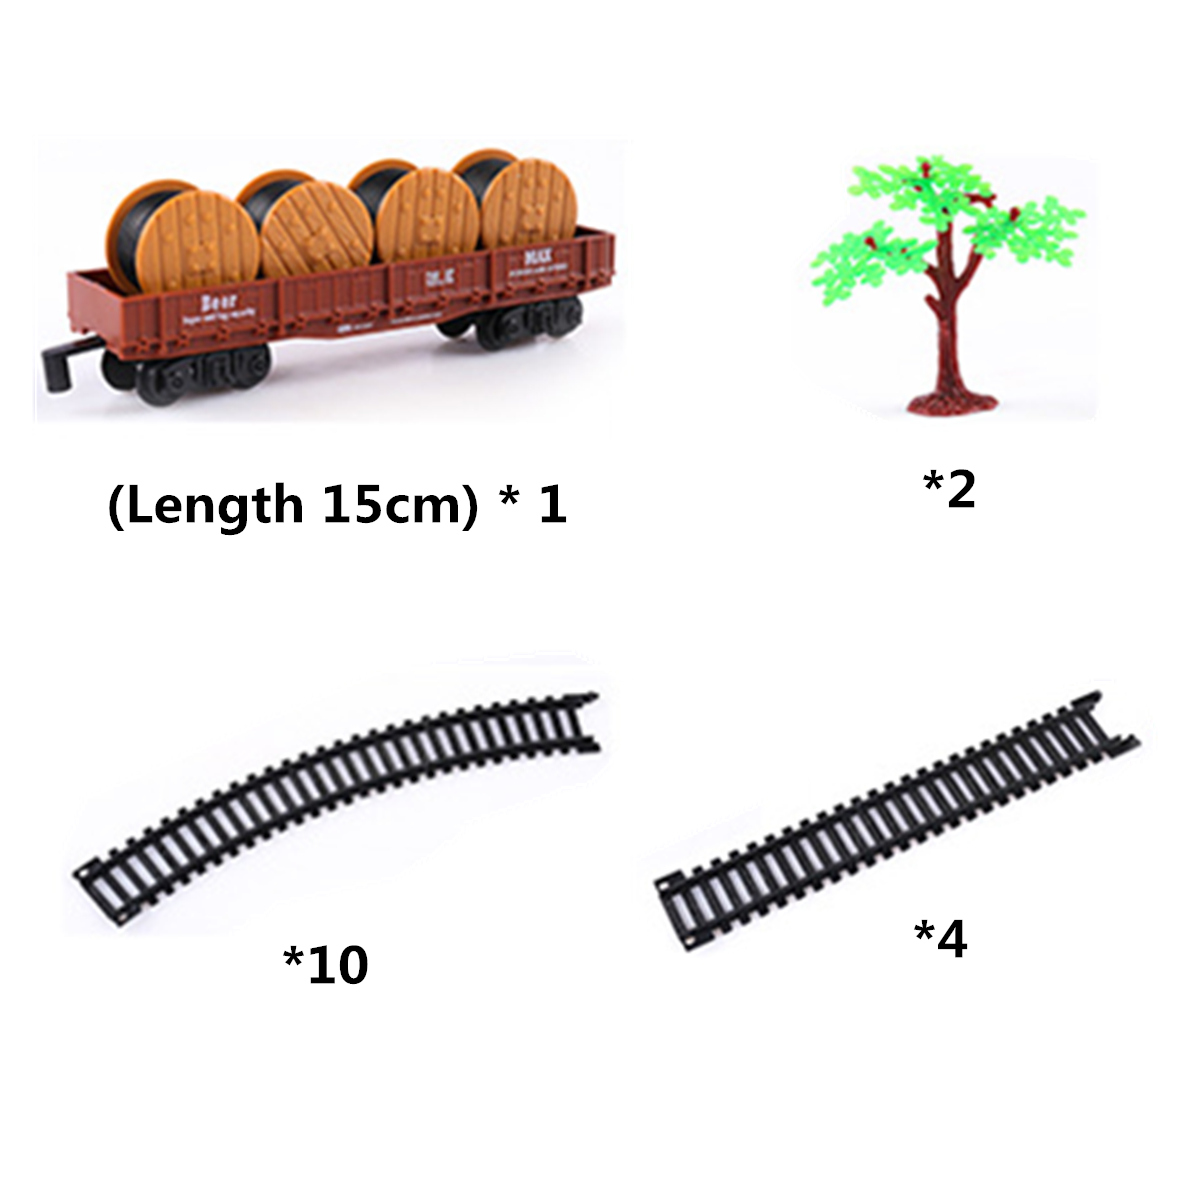 Classic-Track-Electric-Train-Set-Toys-Christmas-Gift-Real-Smoke-And-Sounds-Toy-1385571